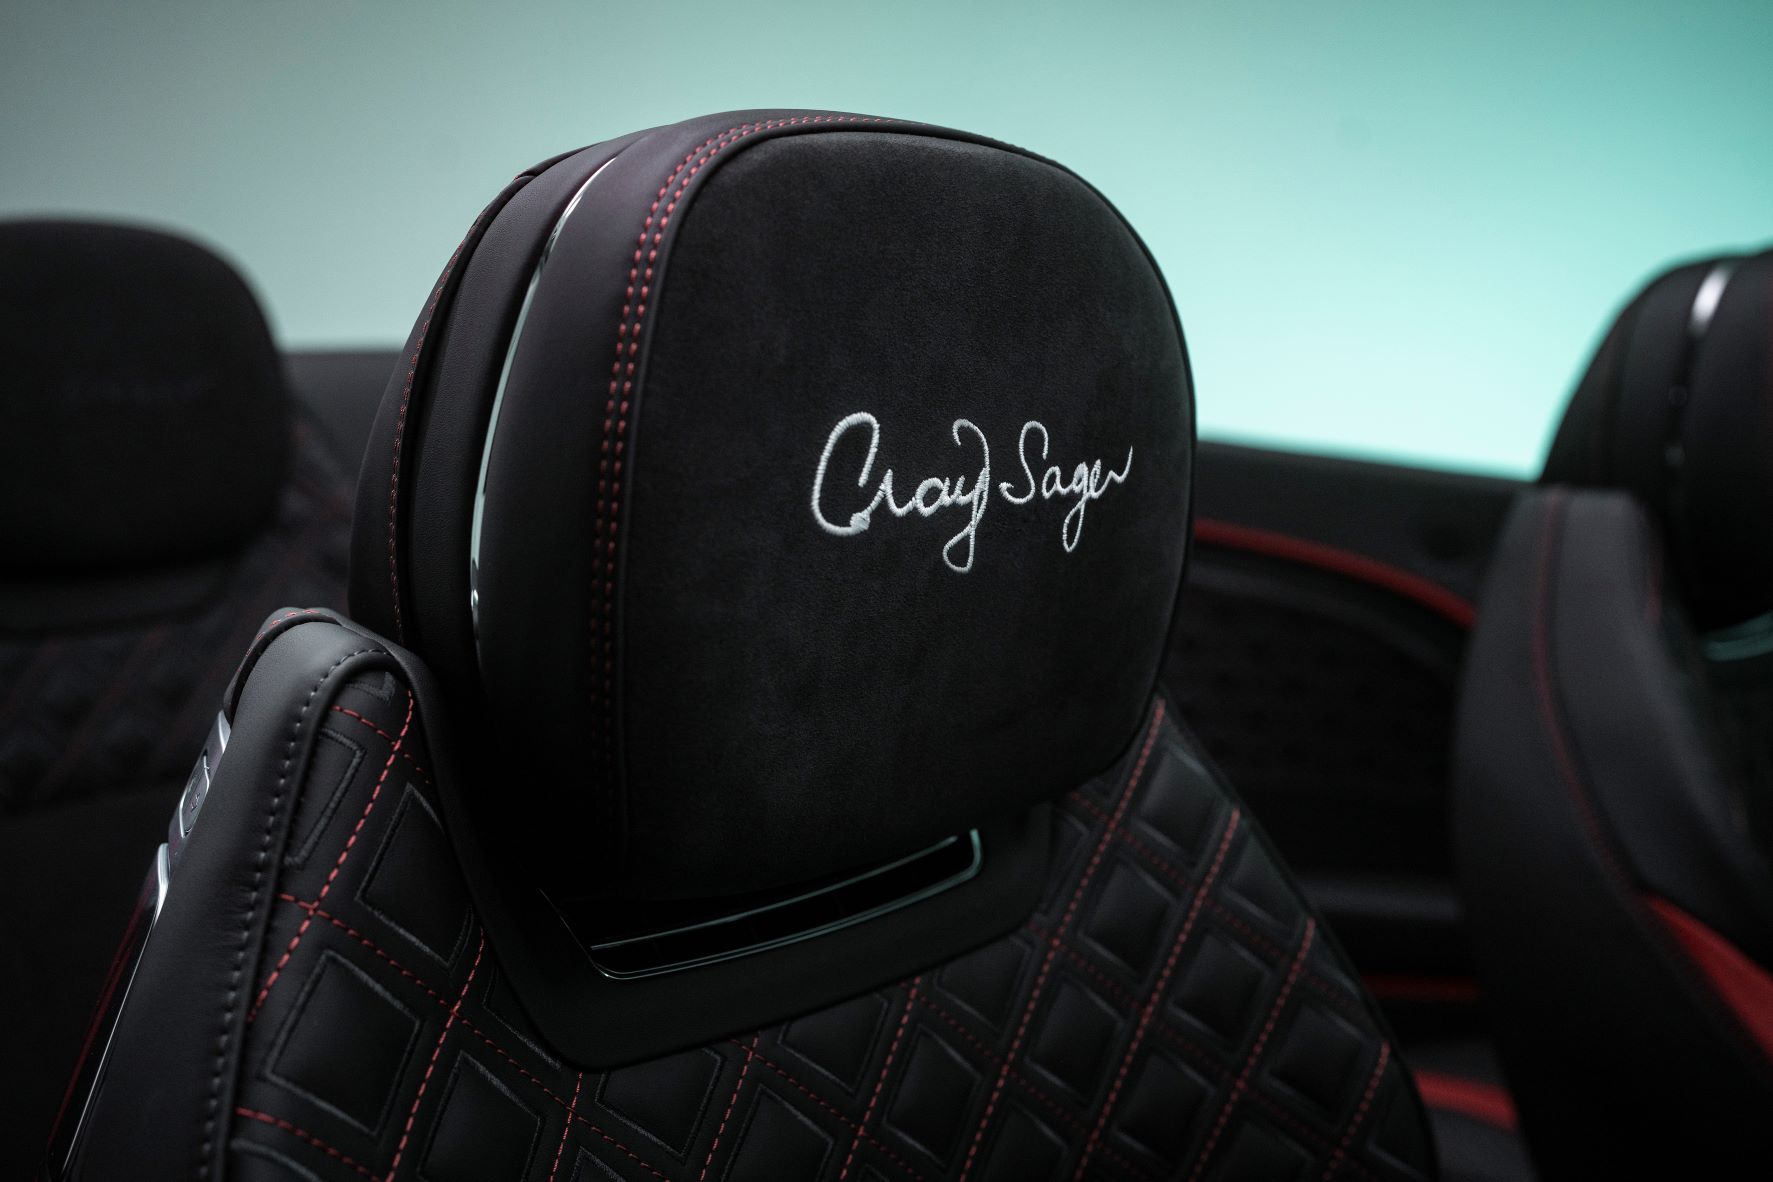 Craig Sager's signature embroidered on the seats of the Bentley Continental GT Speed convertible